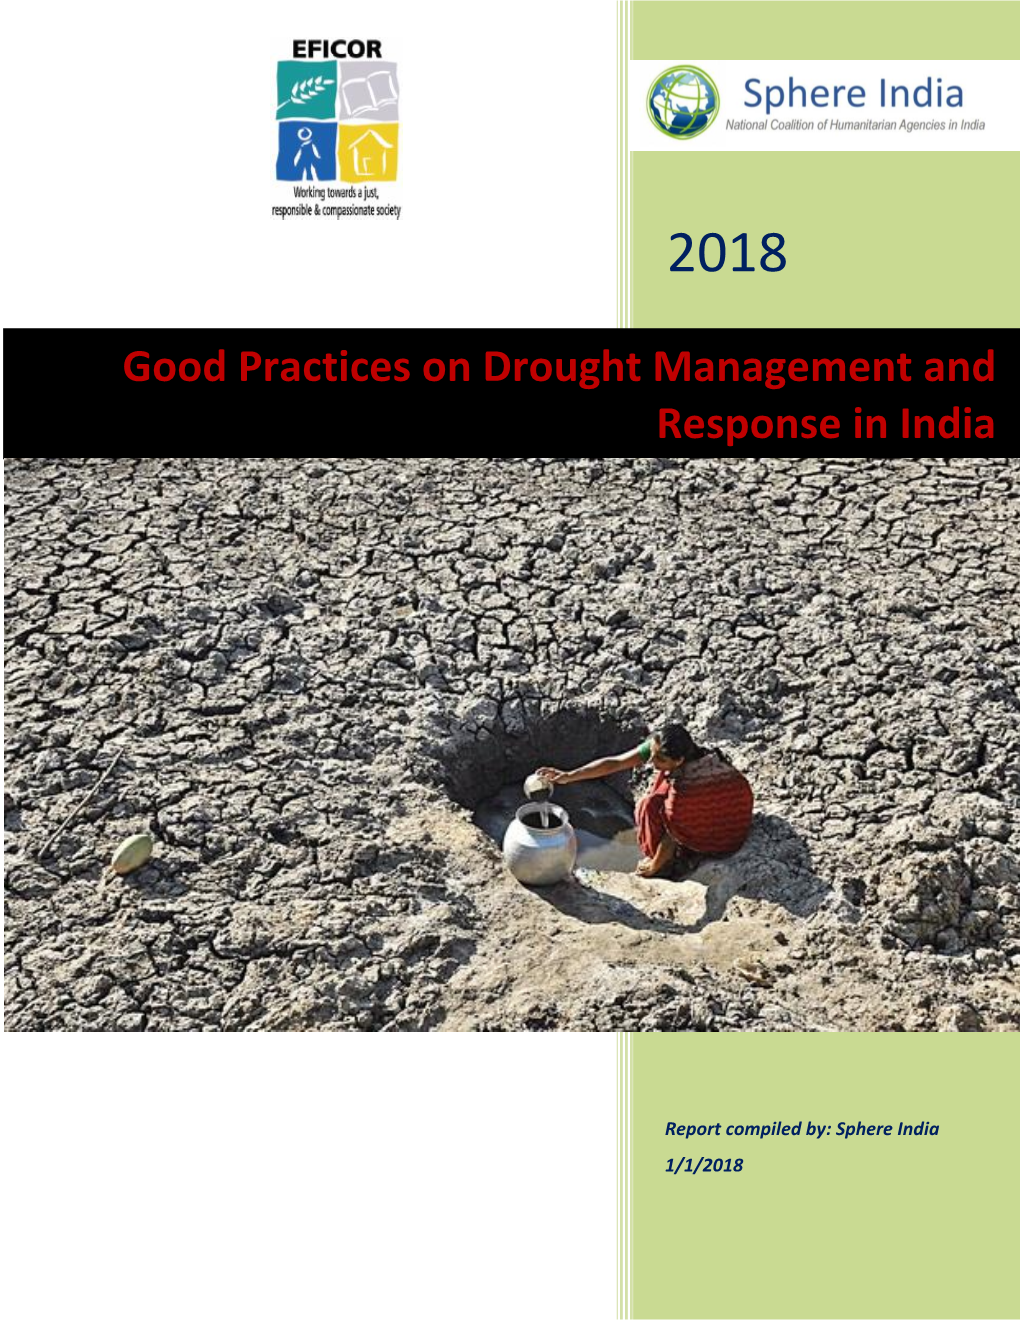 Good Practices on Drought Management and Response in India